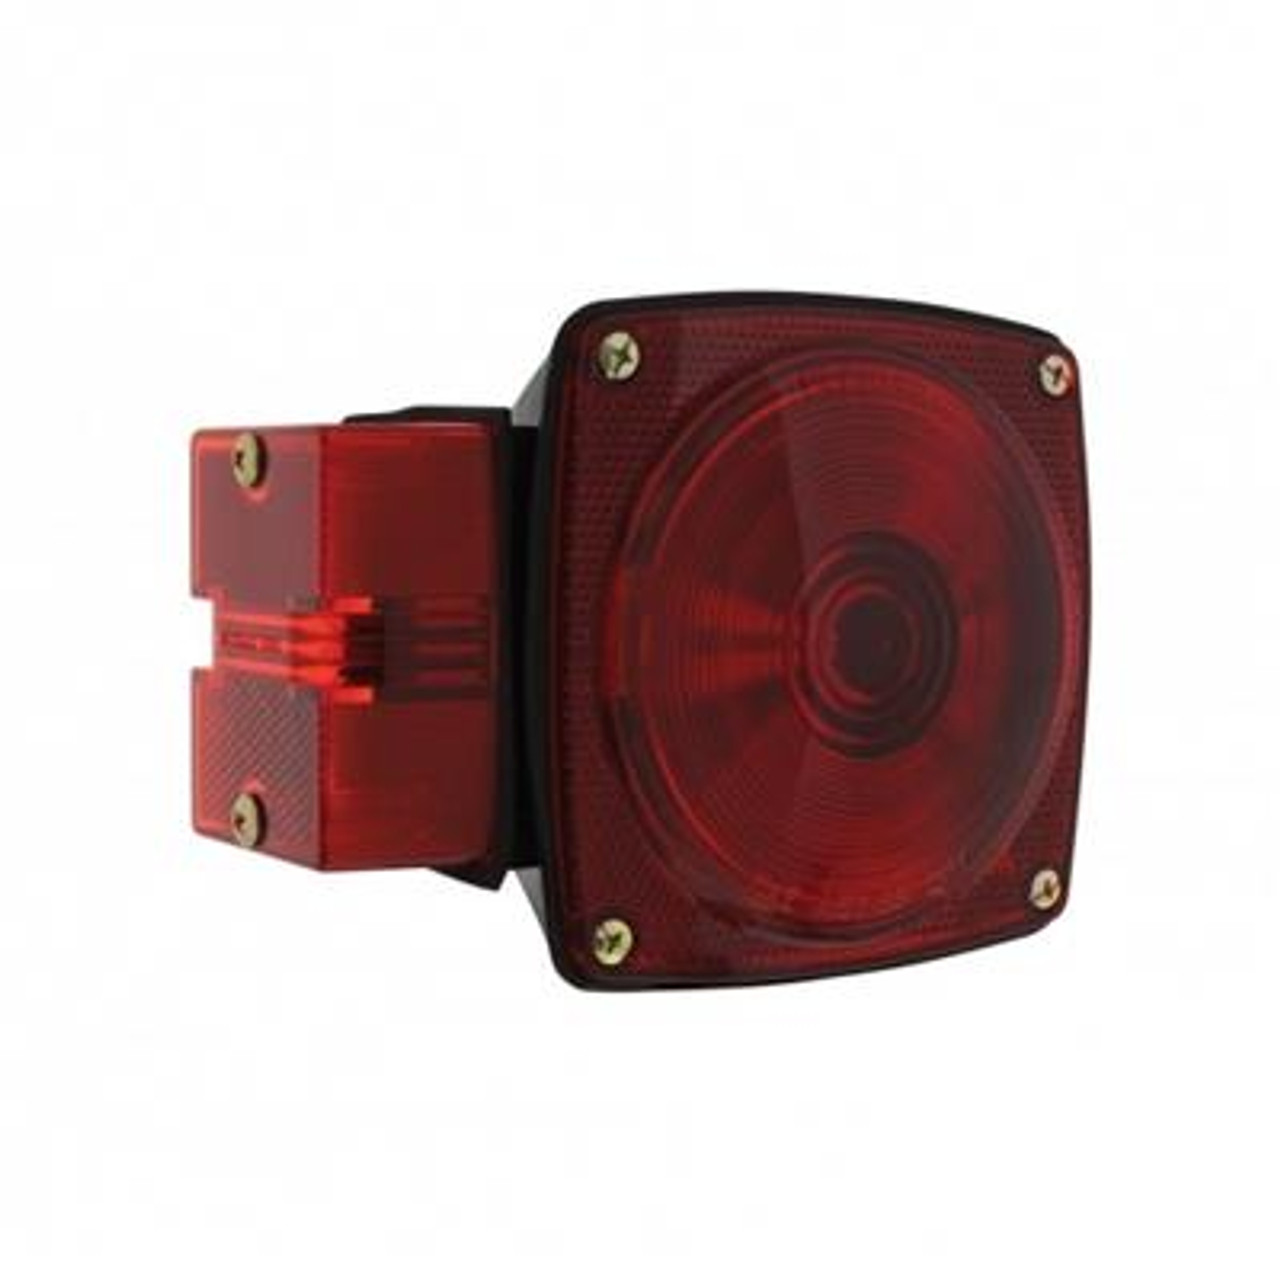 Over 80" Wide Combination Light With License Light